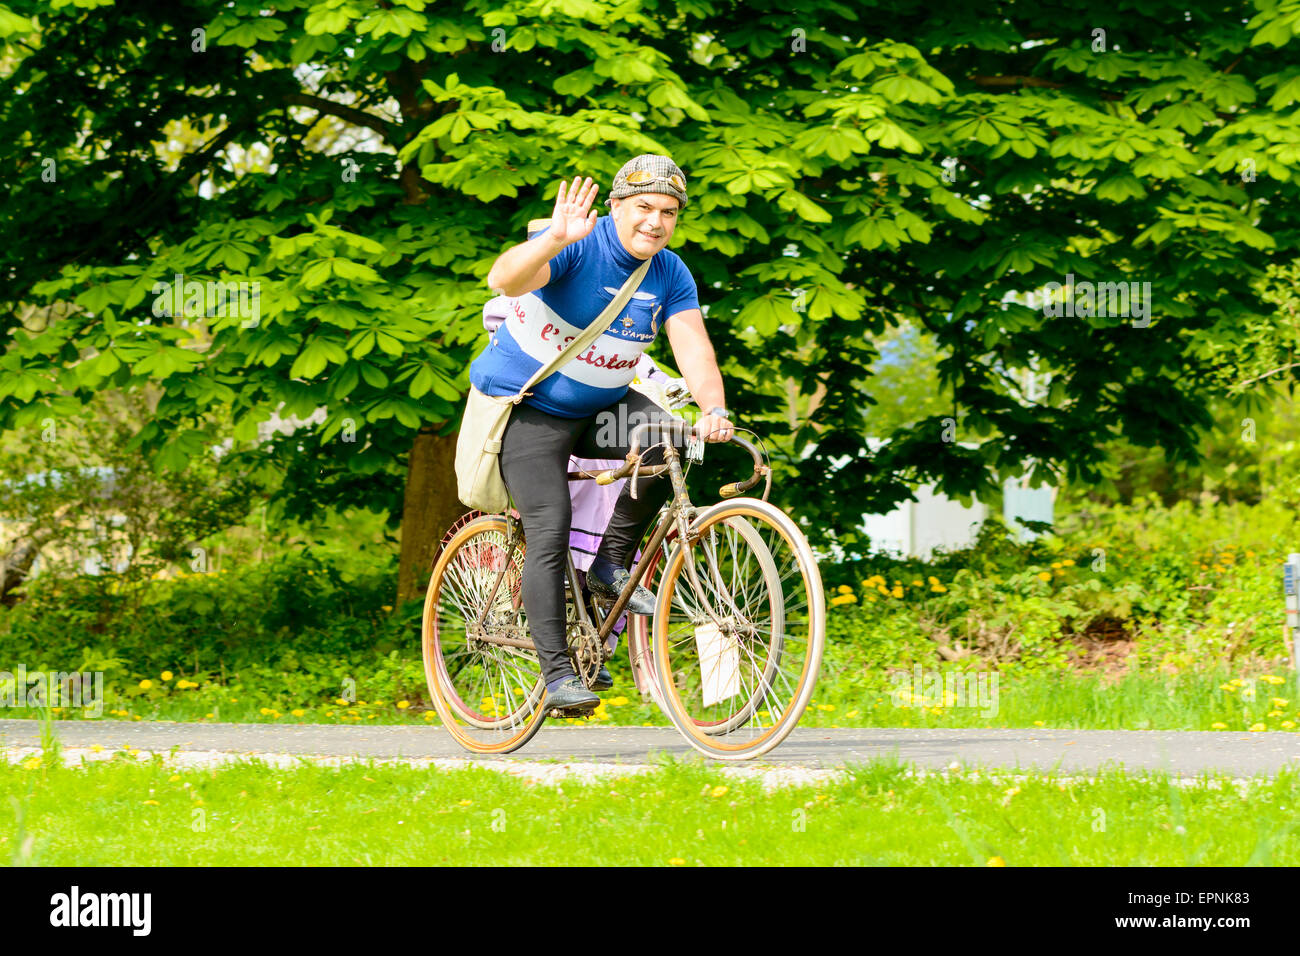 Solvesborg, Sweden - May 16, 2015: International Veteran Cycle Association (IVCA) 35th rally. Costume ride through public streets in town. Ride through park. Stock Photo